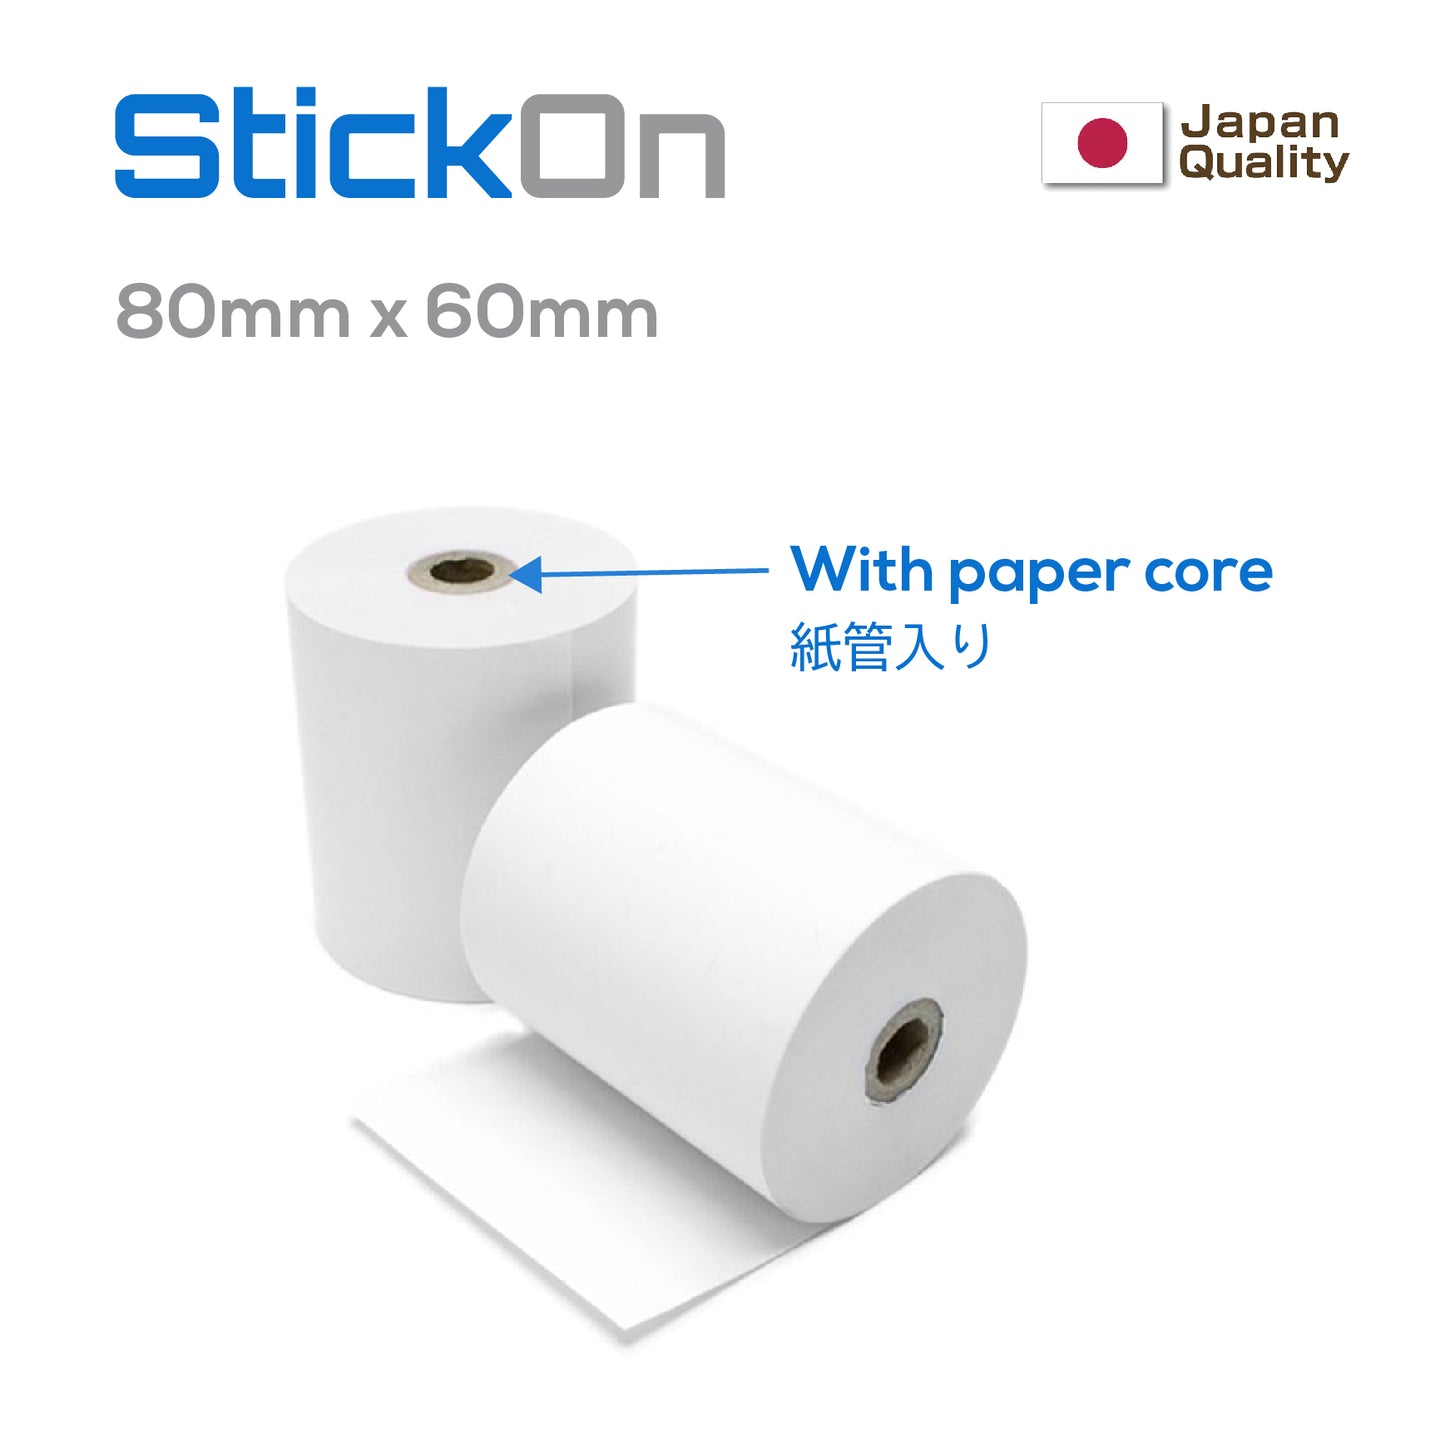 Thermal Receipt Paper Roll [Various Size] [10 Rolls]